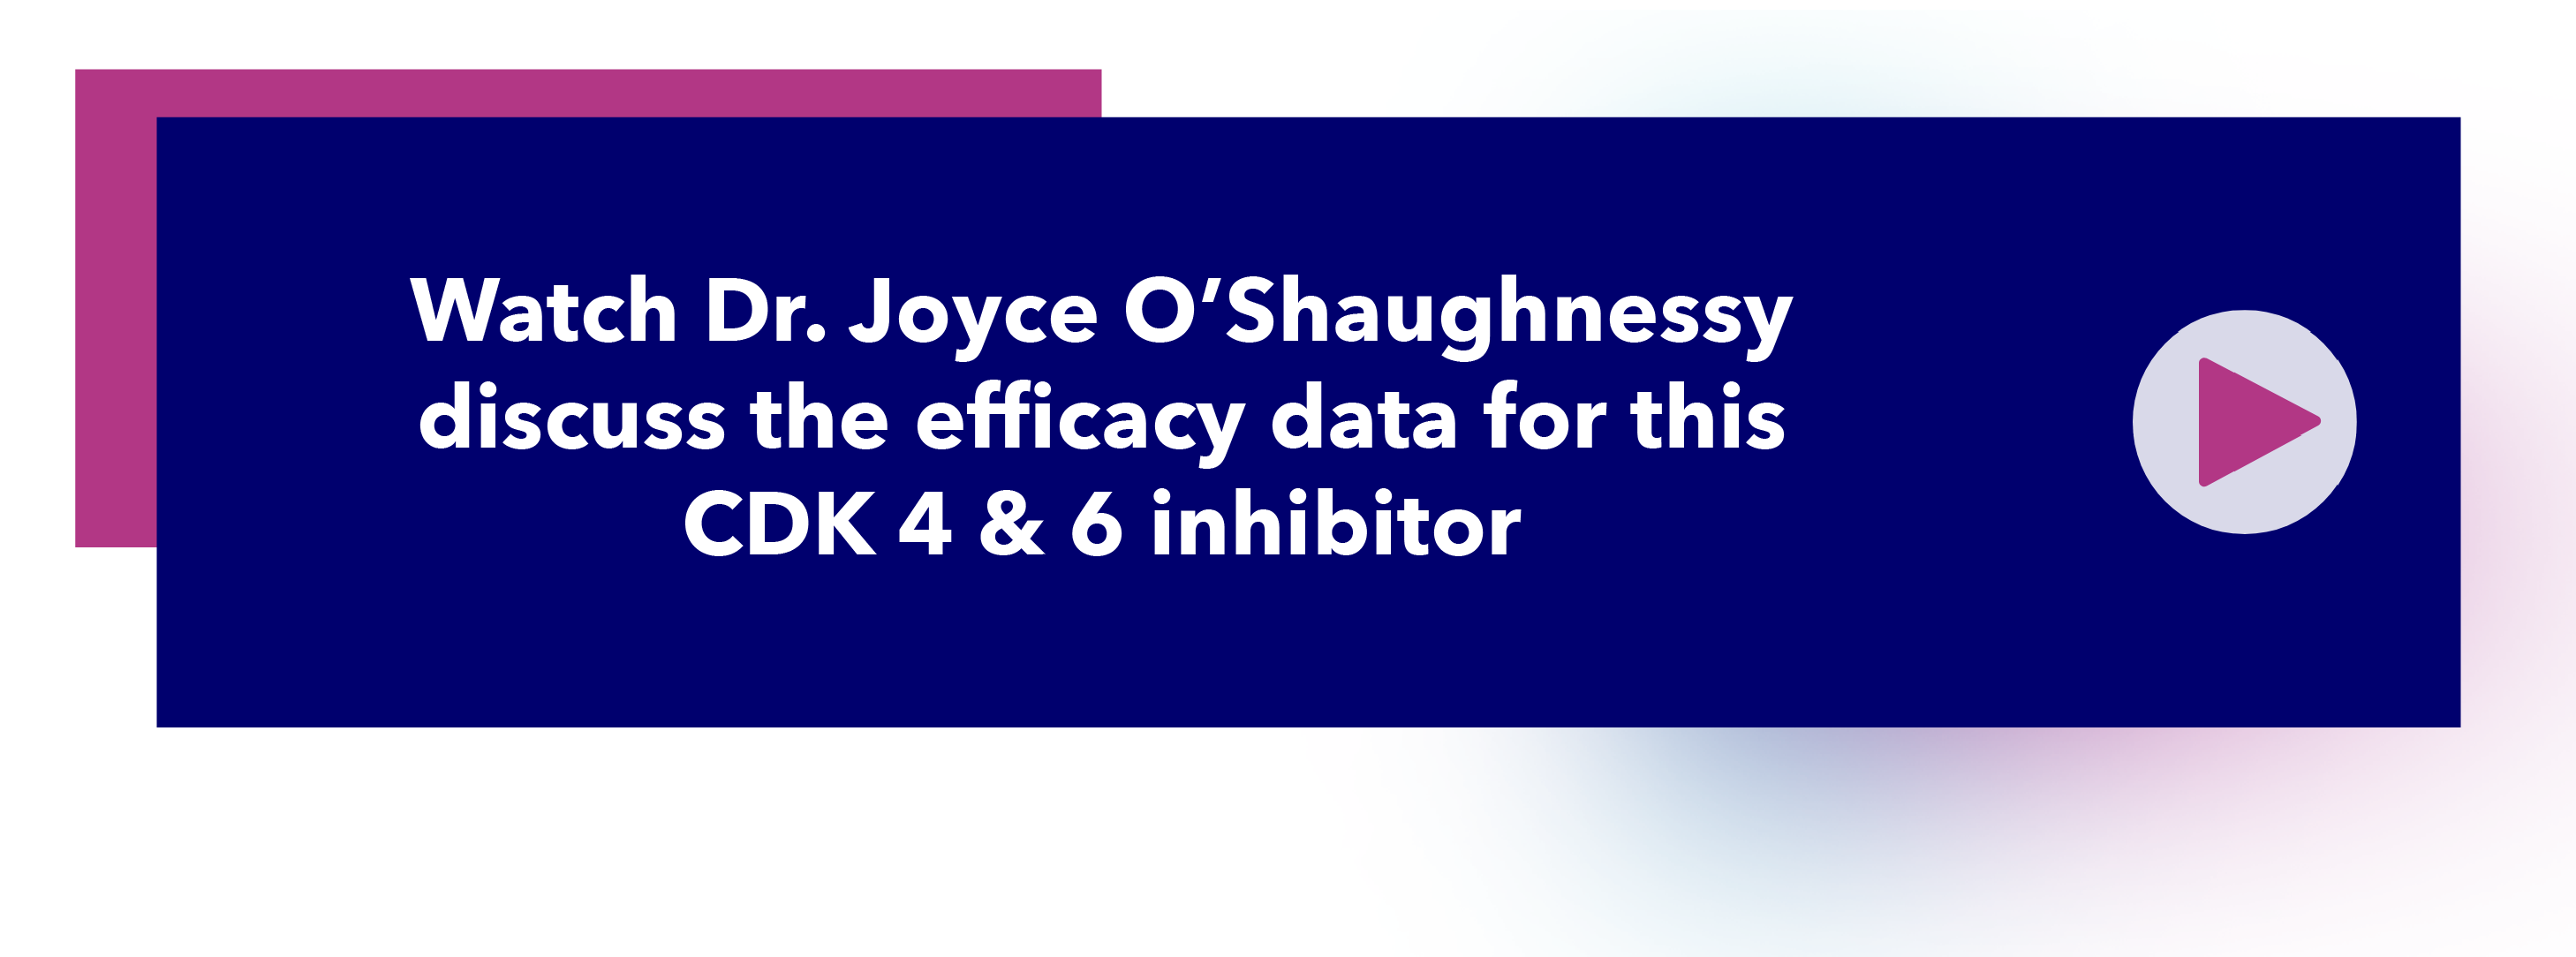 Watch Dr. Joyce O'Shaughnessy discuss the efficacy data